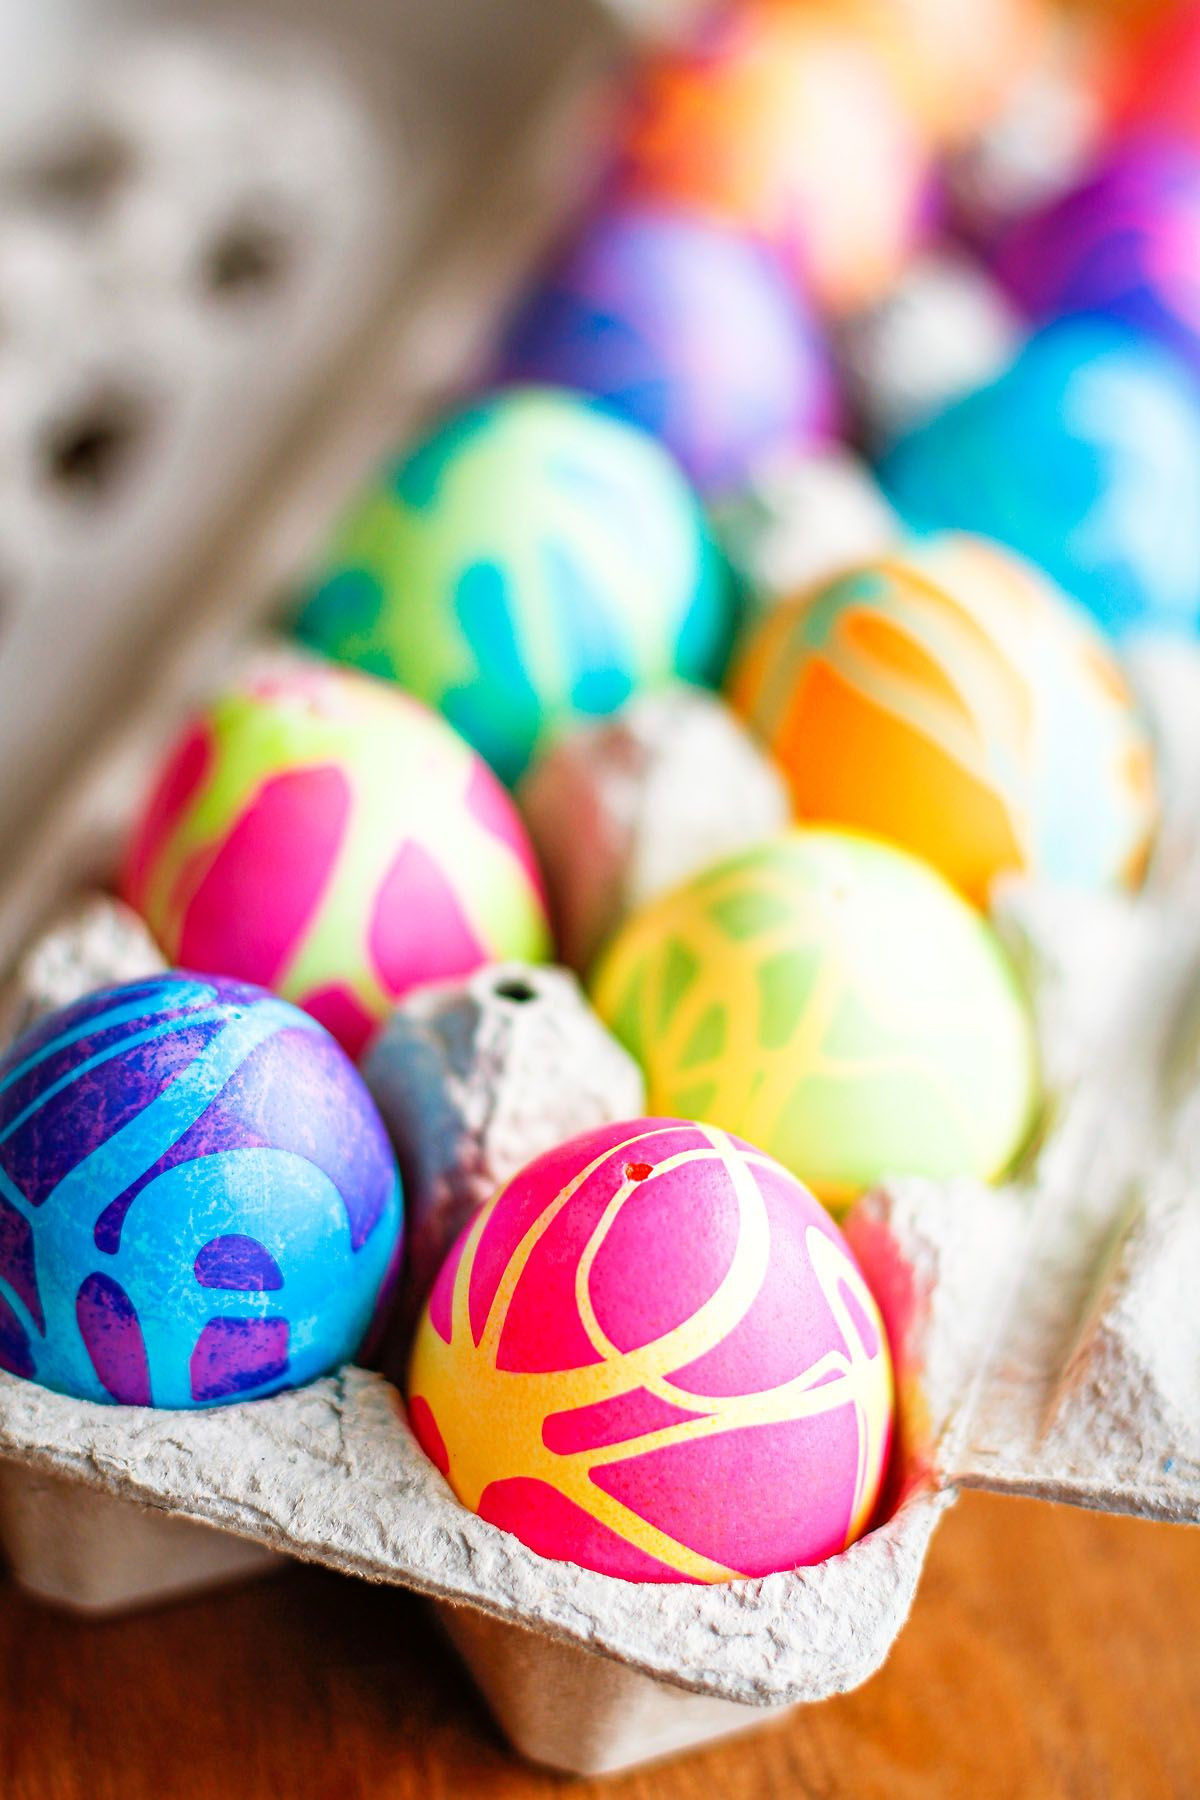 Easter Eggs With Food Coloring
 Pin on Crafts Recipes DIY and More